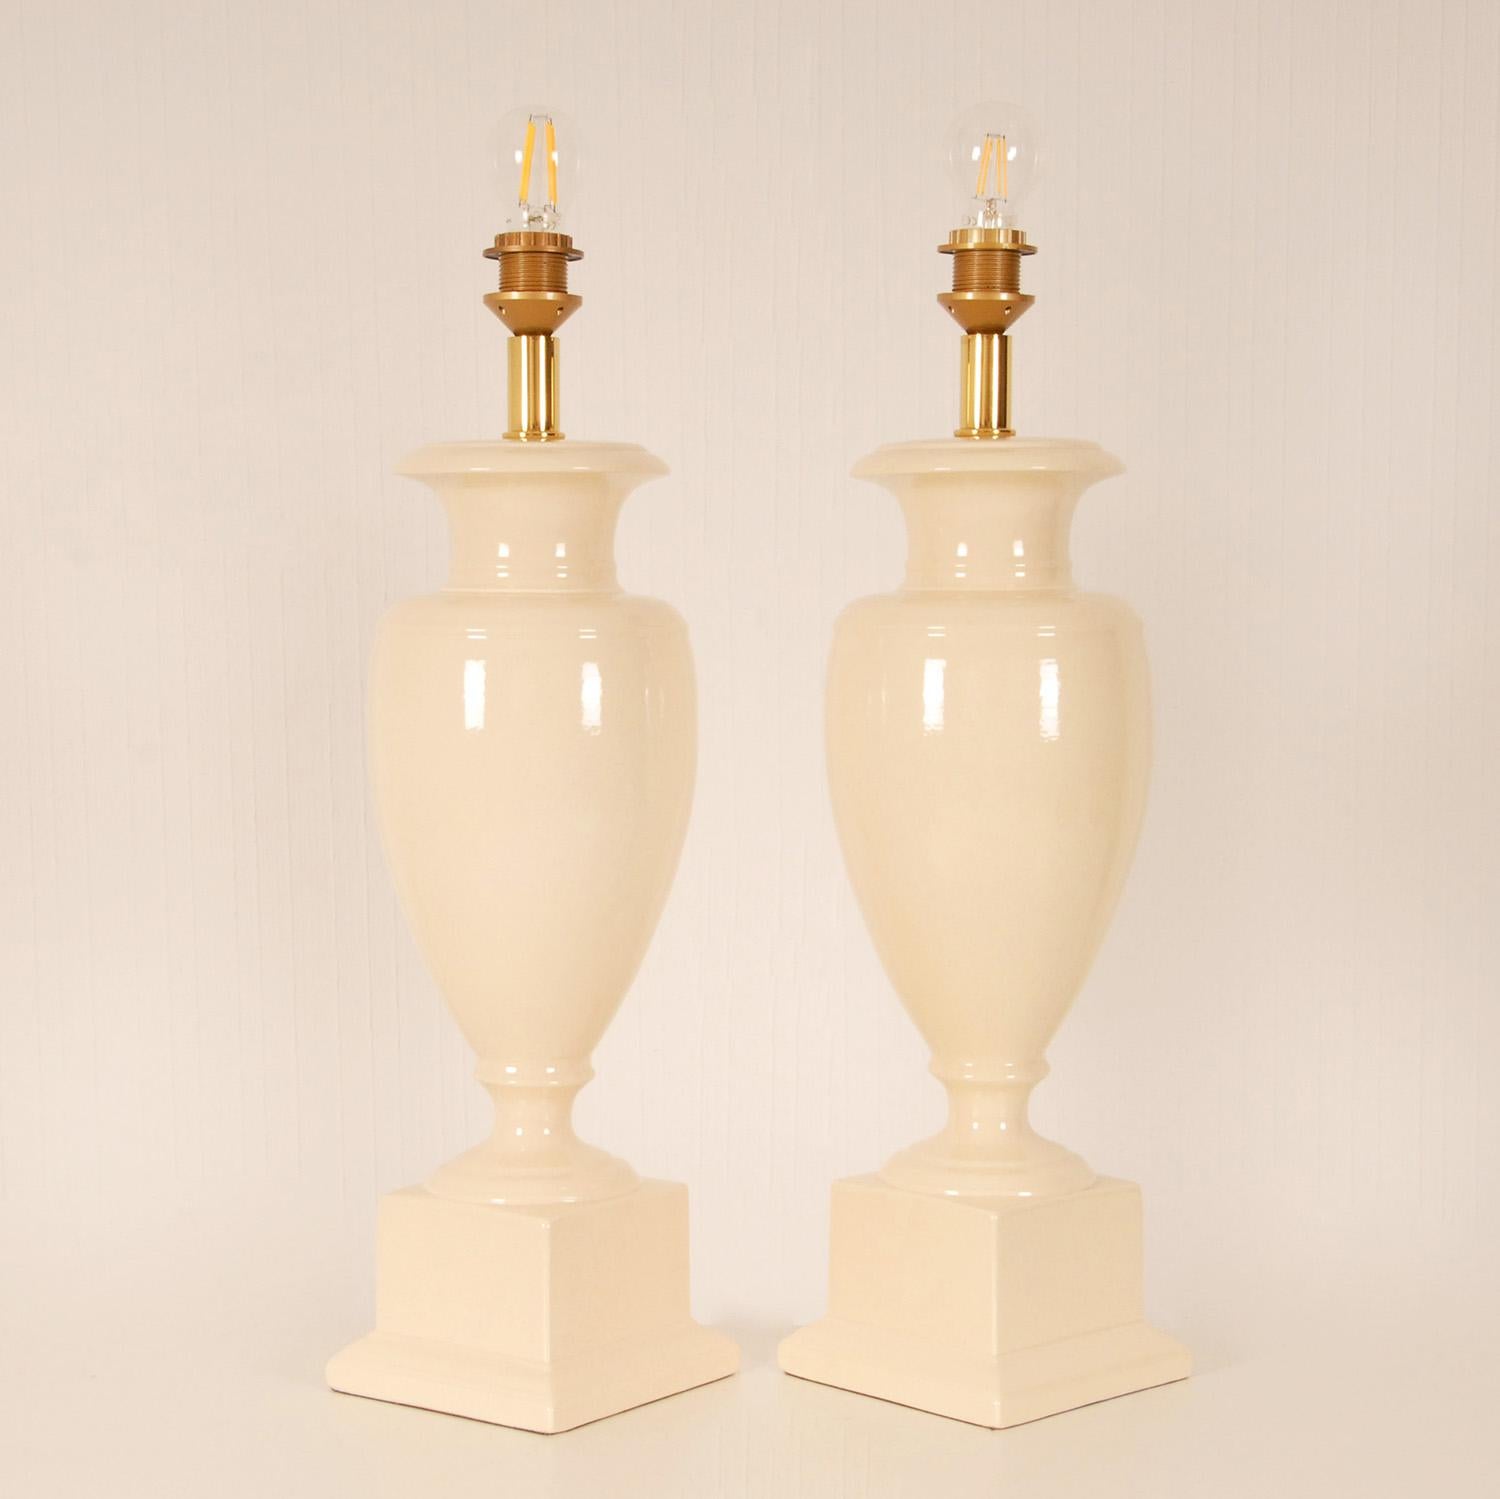 Vintage Italian Ceramic Vase Lamps off White Tall Modern Table Lamps, a Pair 1